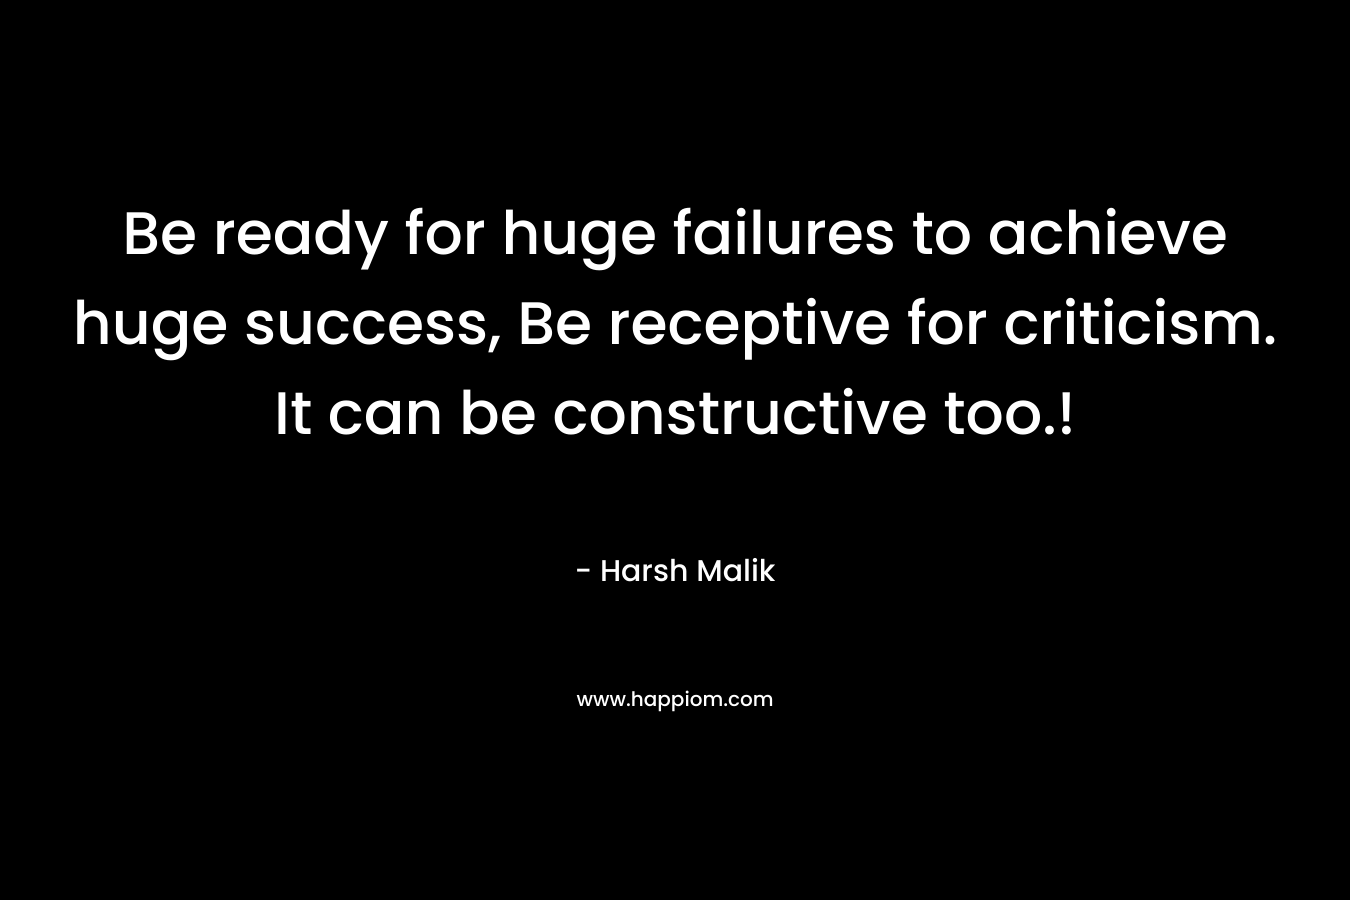 Be ready for huge failures to achieve huge success, Be receptive for criticism. It can be constructive too.!